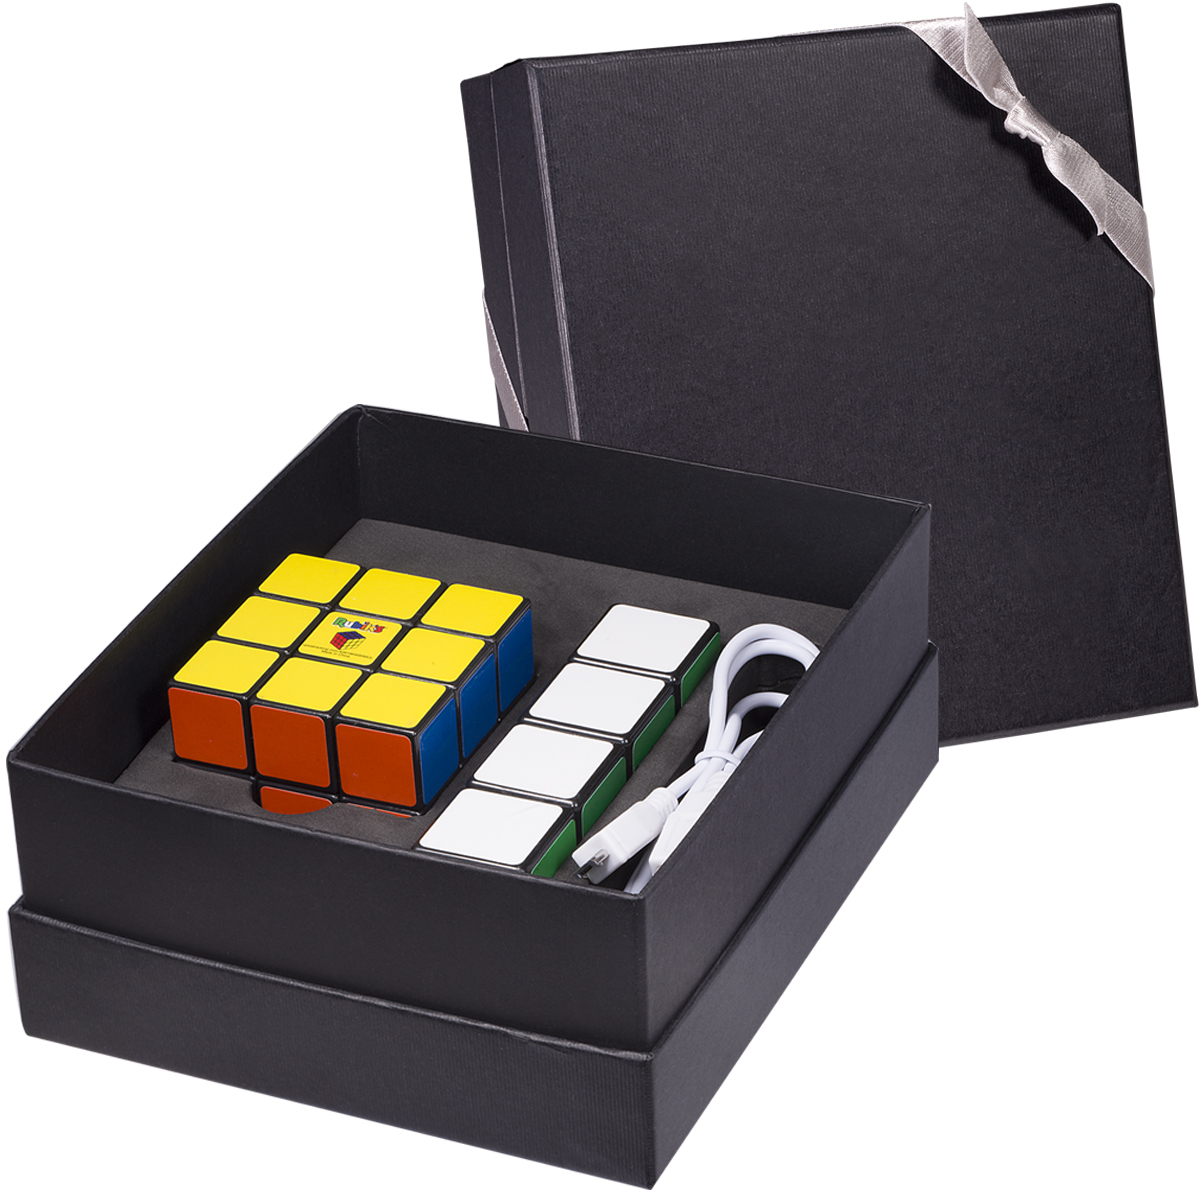 Rubik's® Mobile Charger & Cube Set